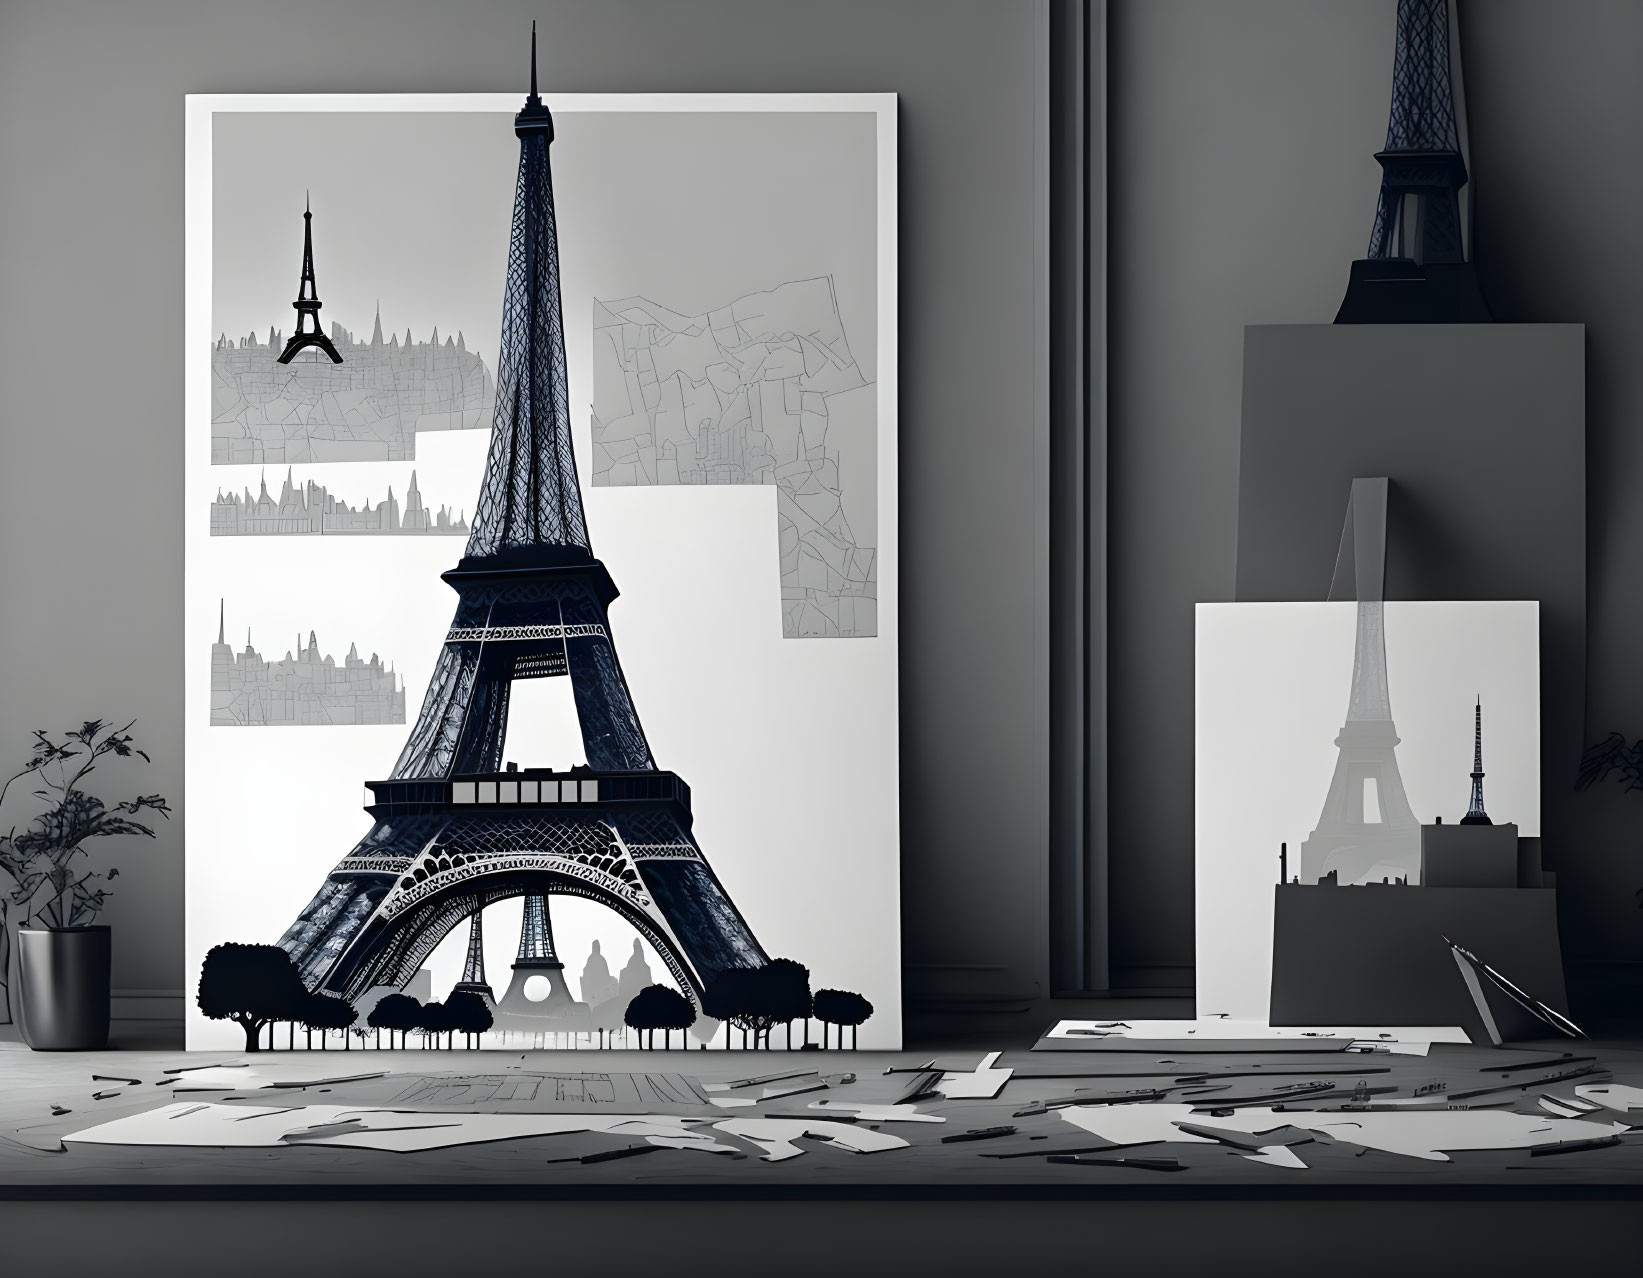 Grayscale room interior with Eiffel Tower model, themed pictures, and city map